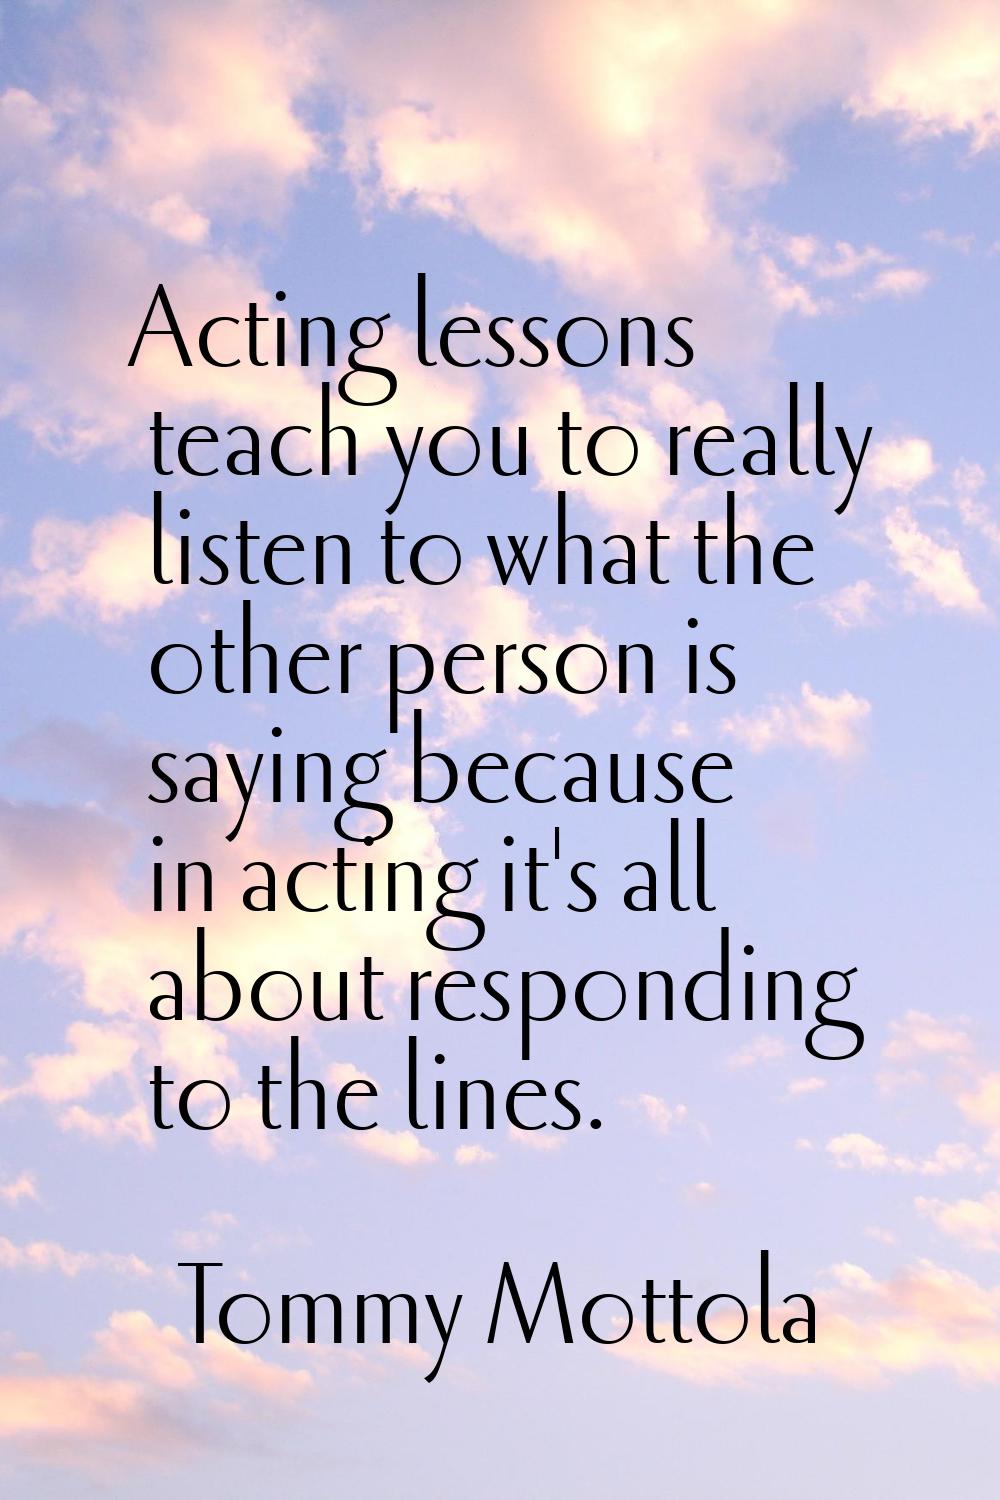 Acting lessons teach you to really listen to what the other person is saying because in acting it's